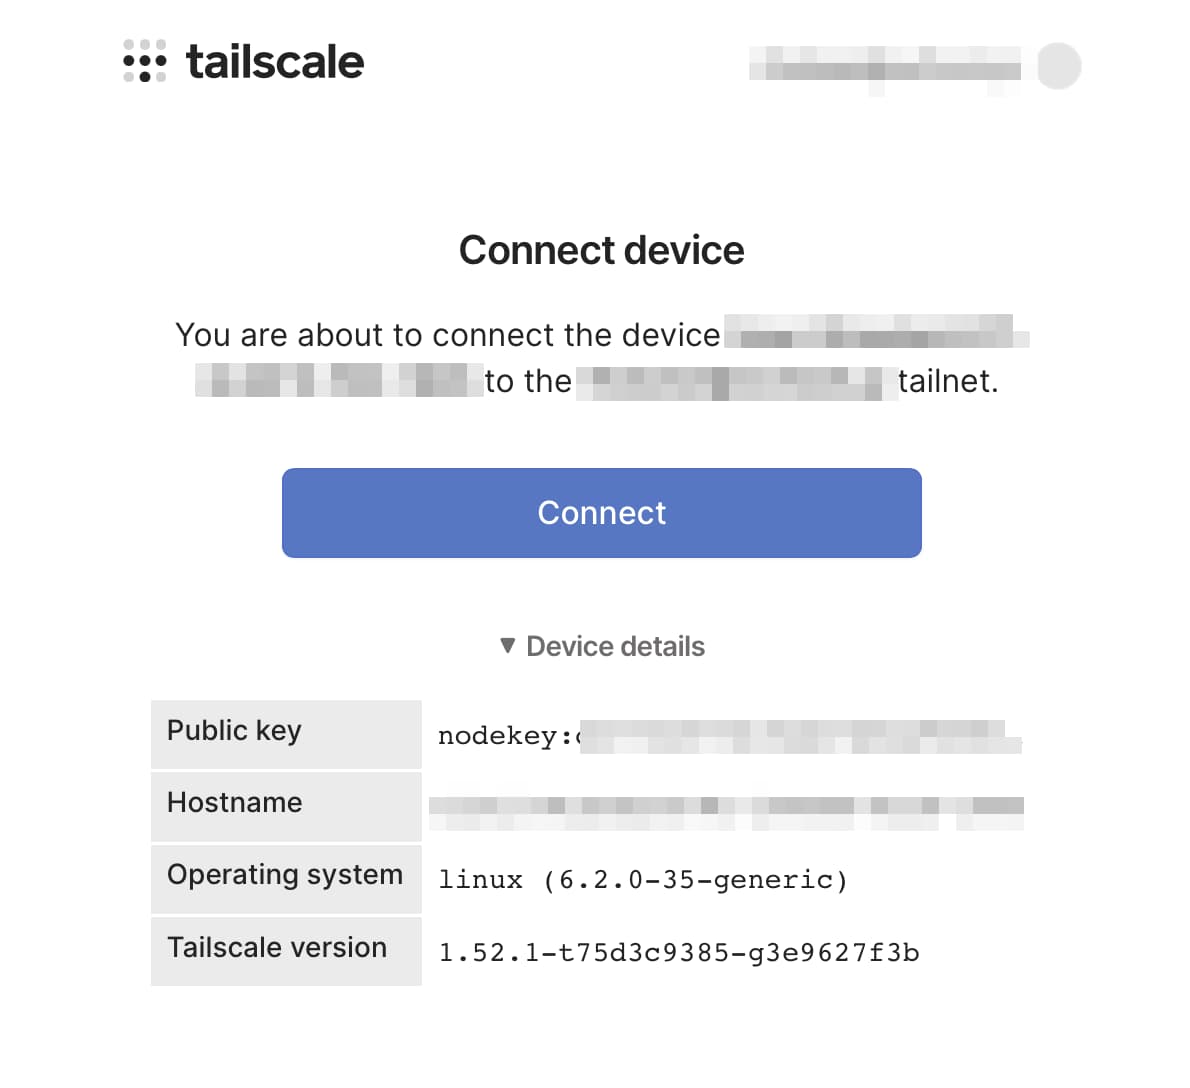 Tailscaleに接続する端末情報